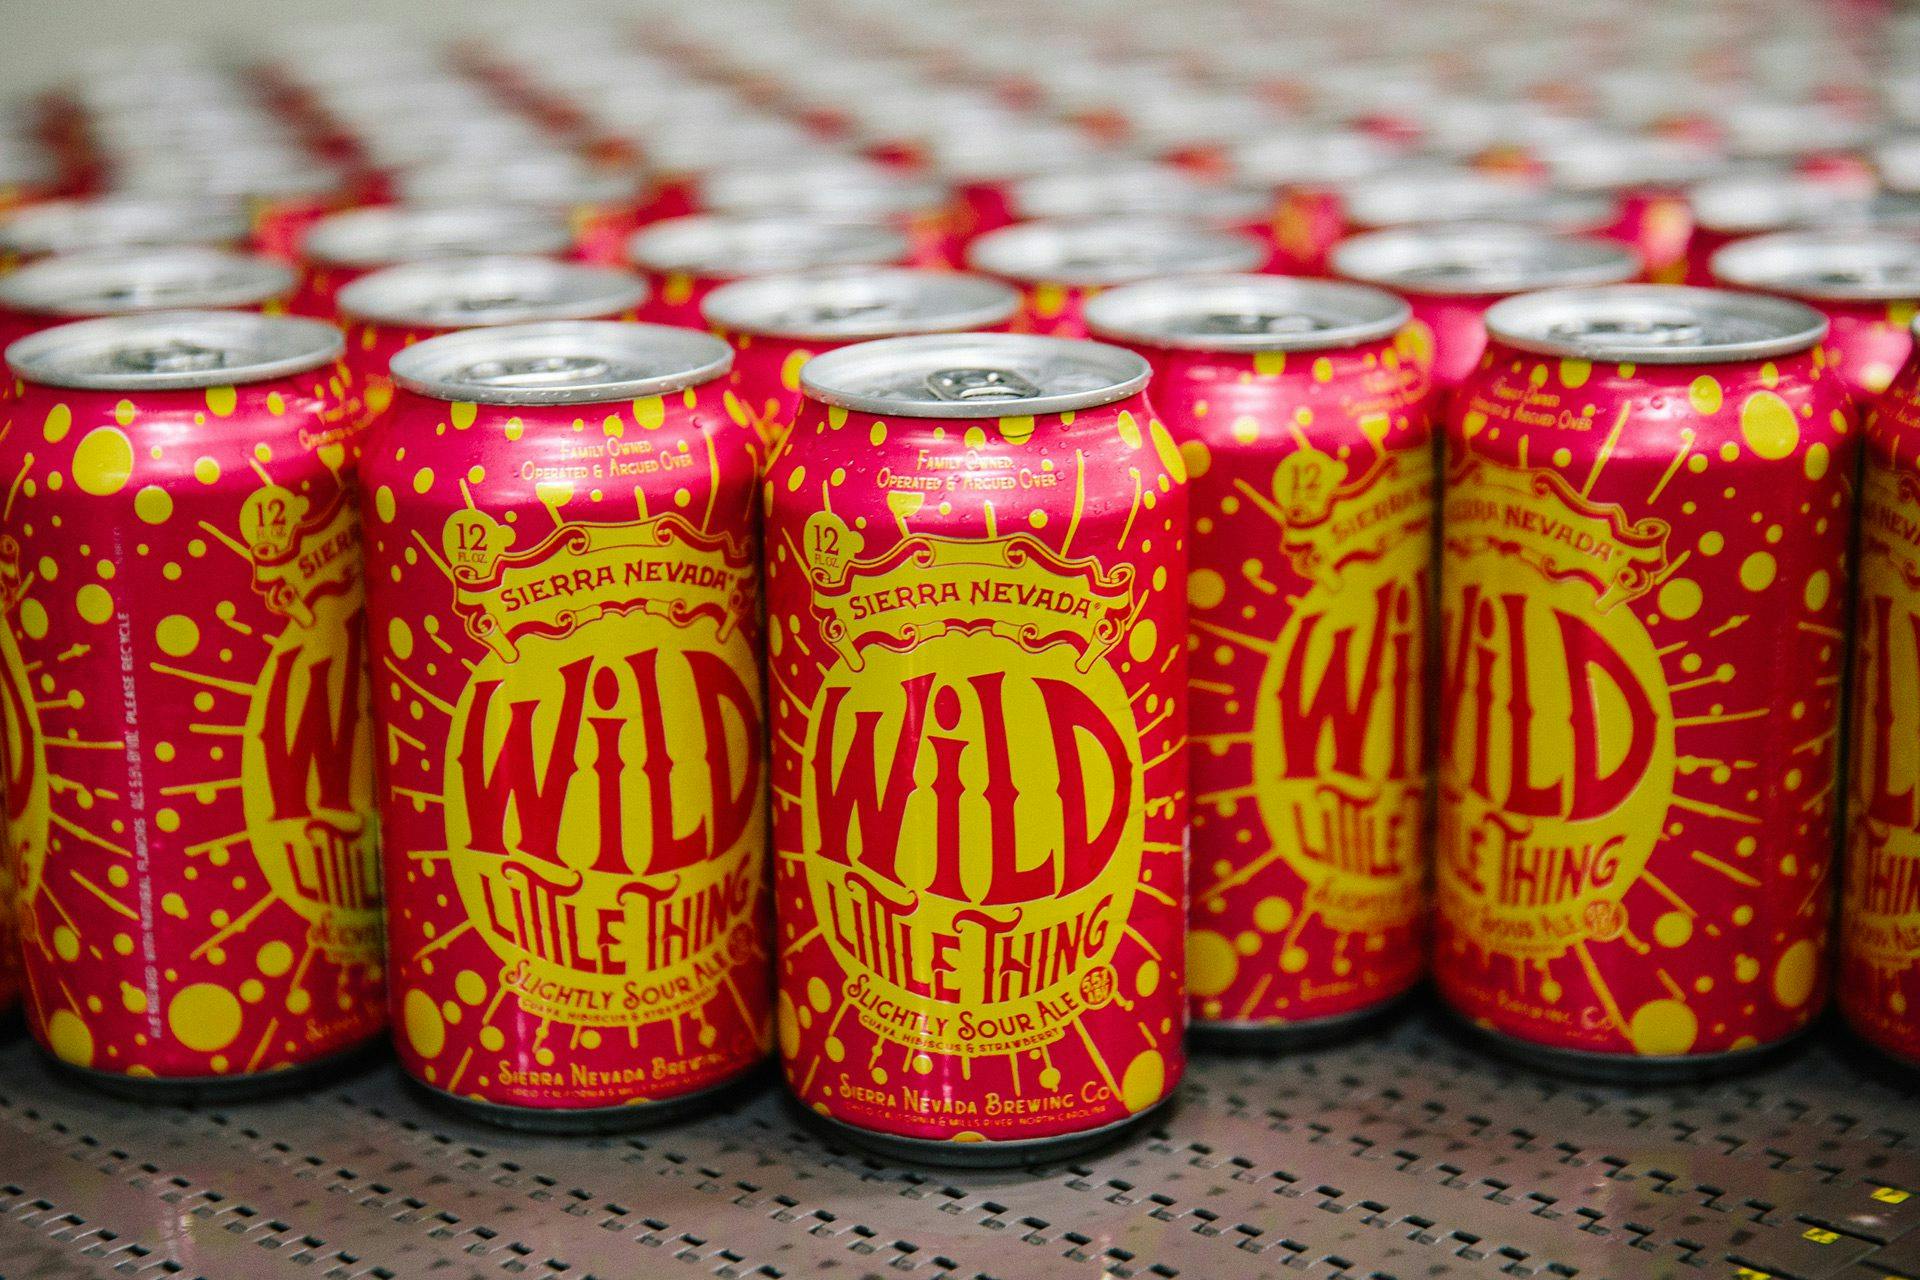 Wild Little Thing sour beer cans